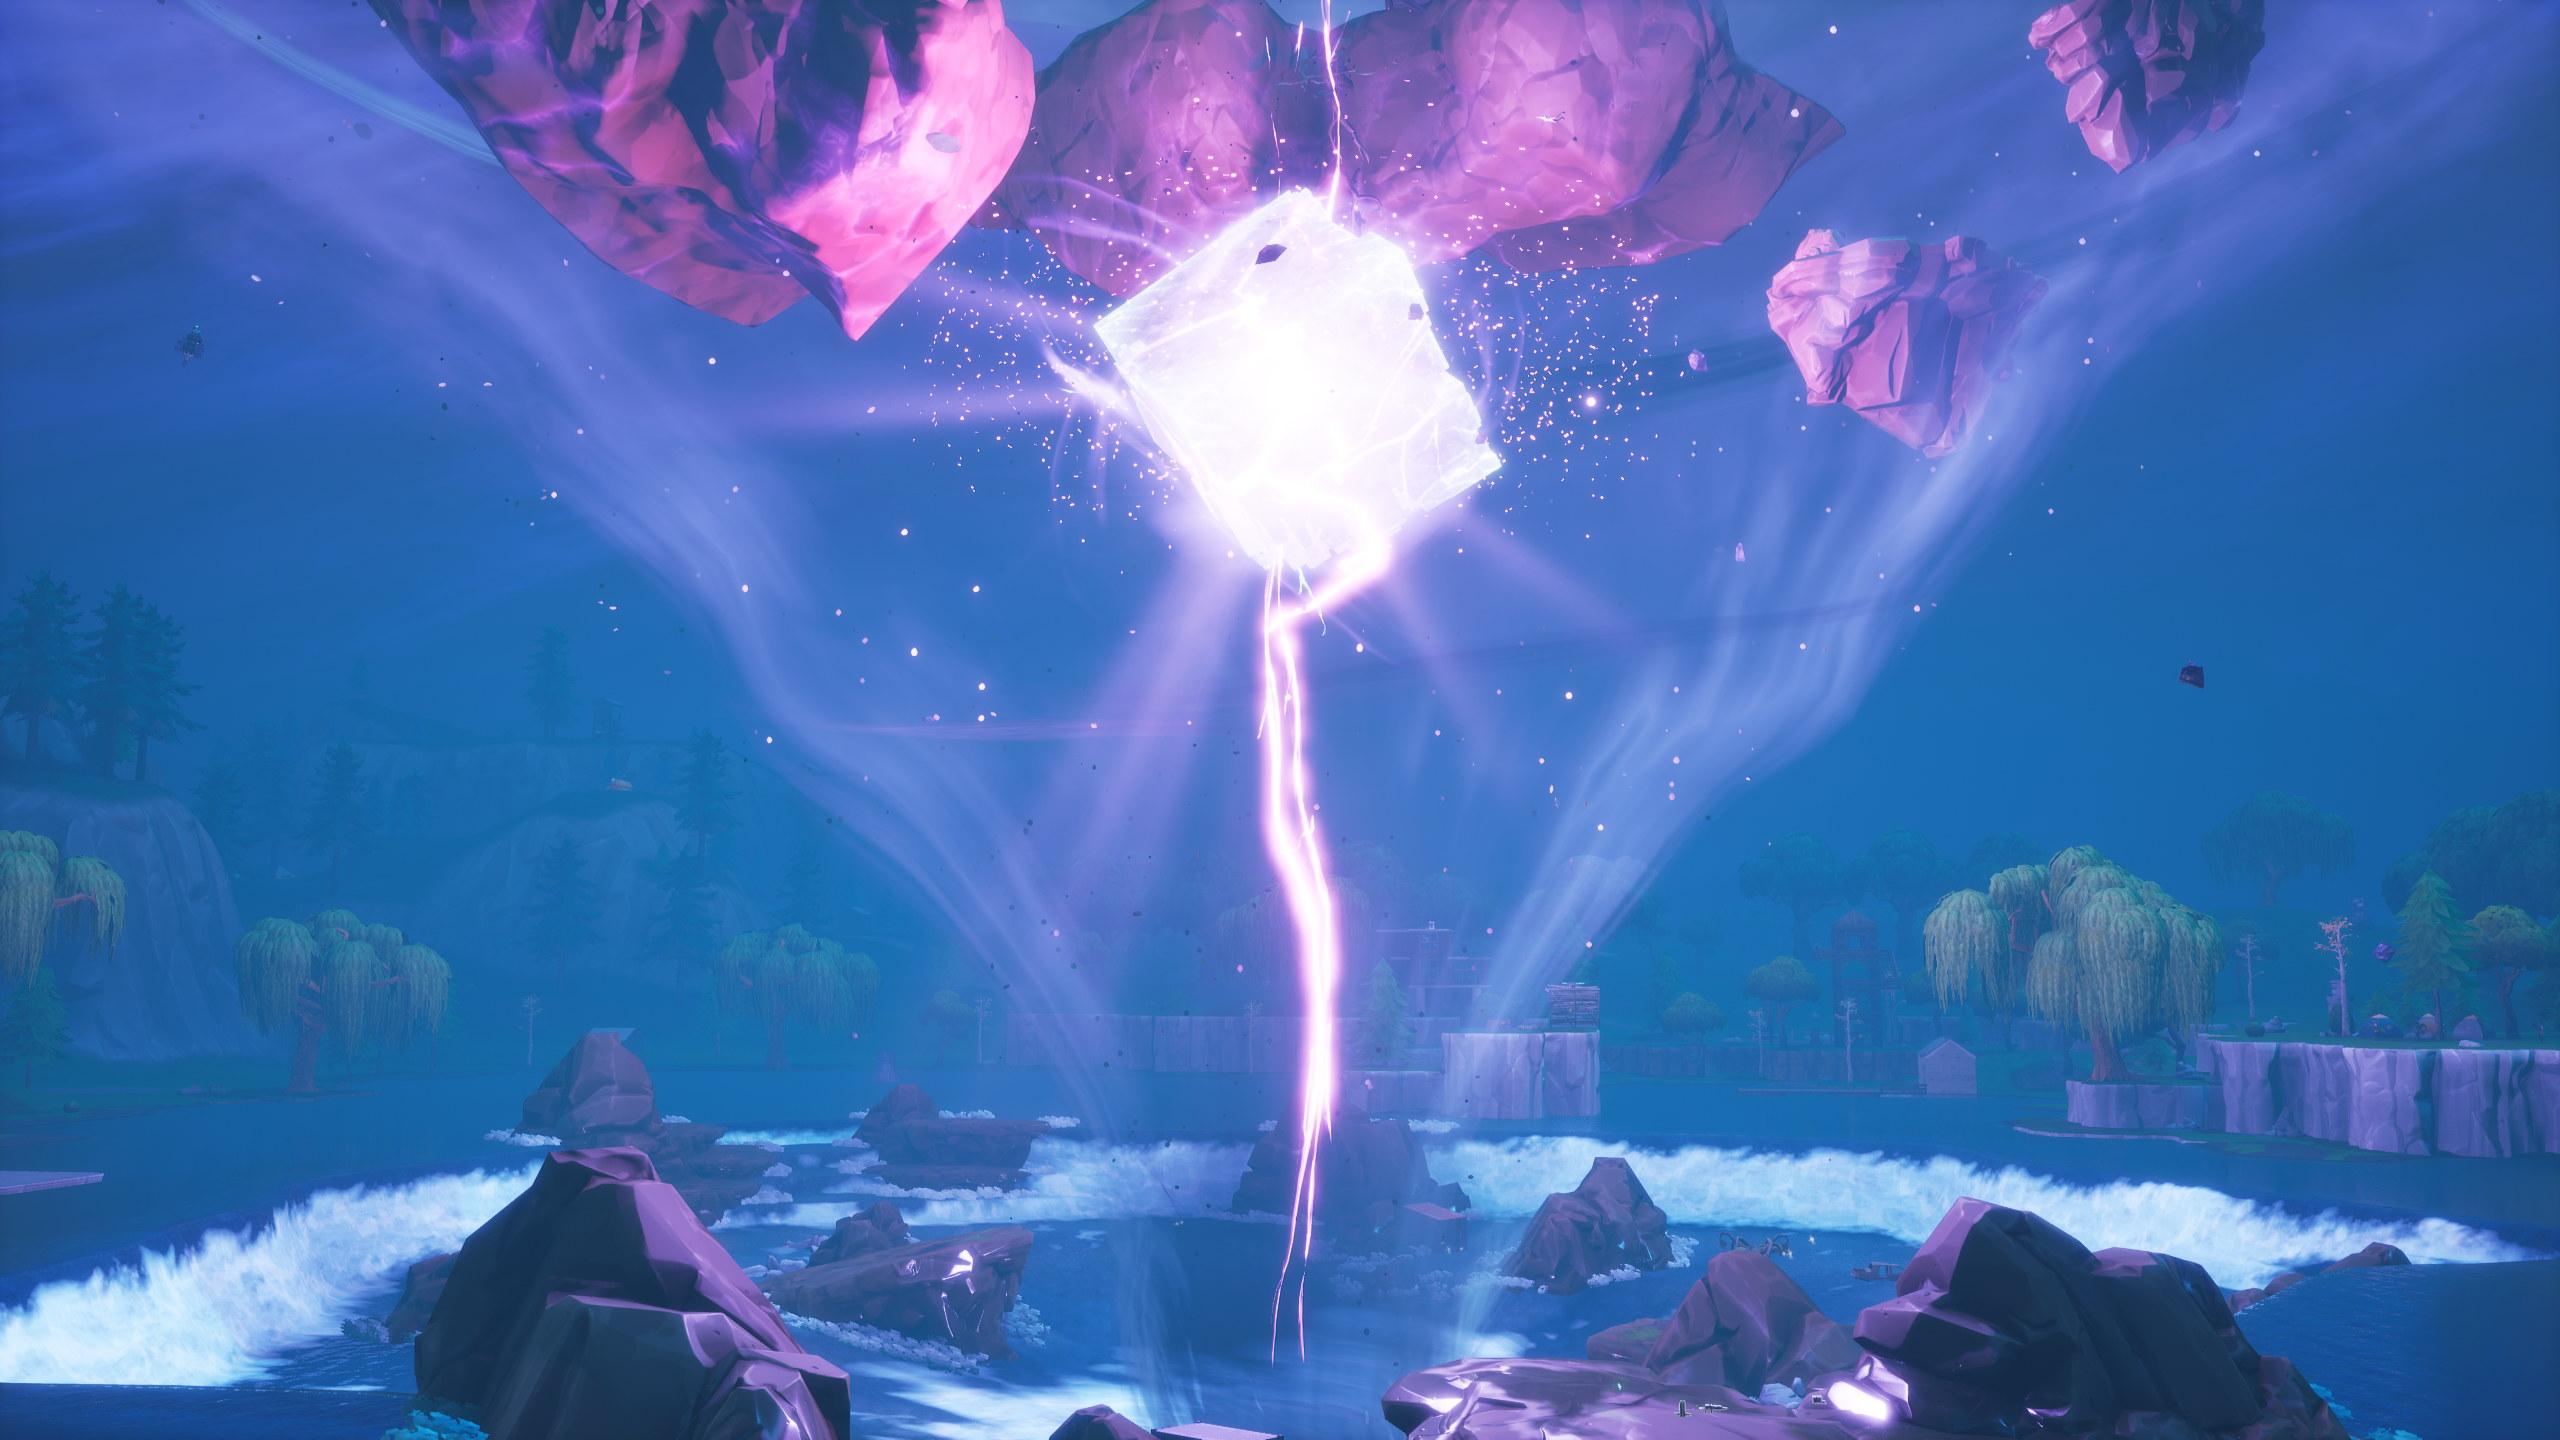 Fortnite's mysterious cube 'Kevin' has exploded in a live event